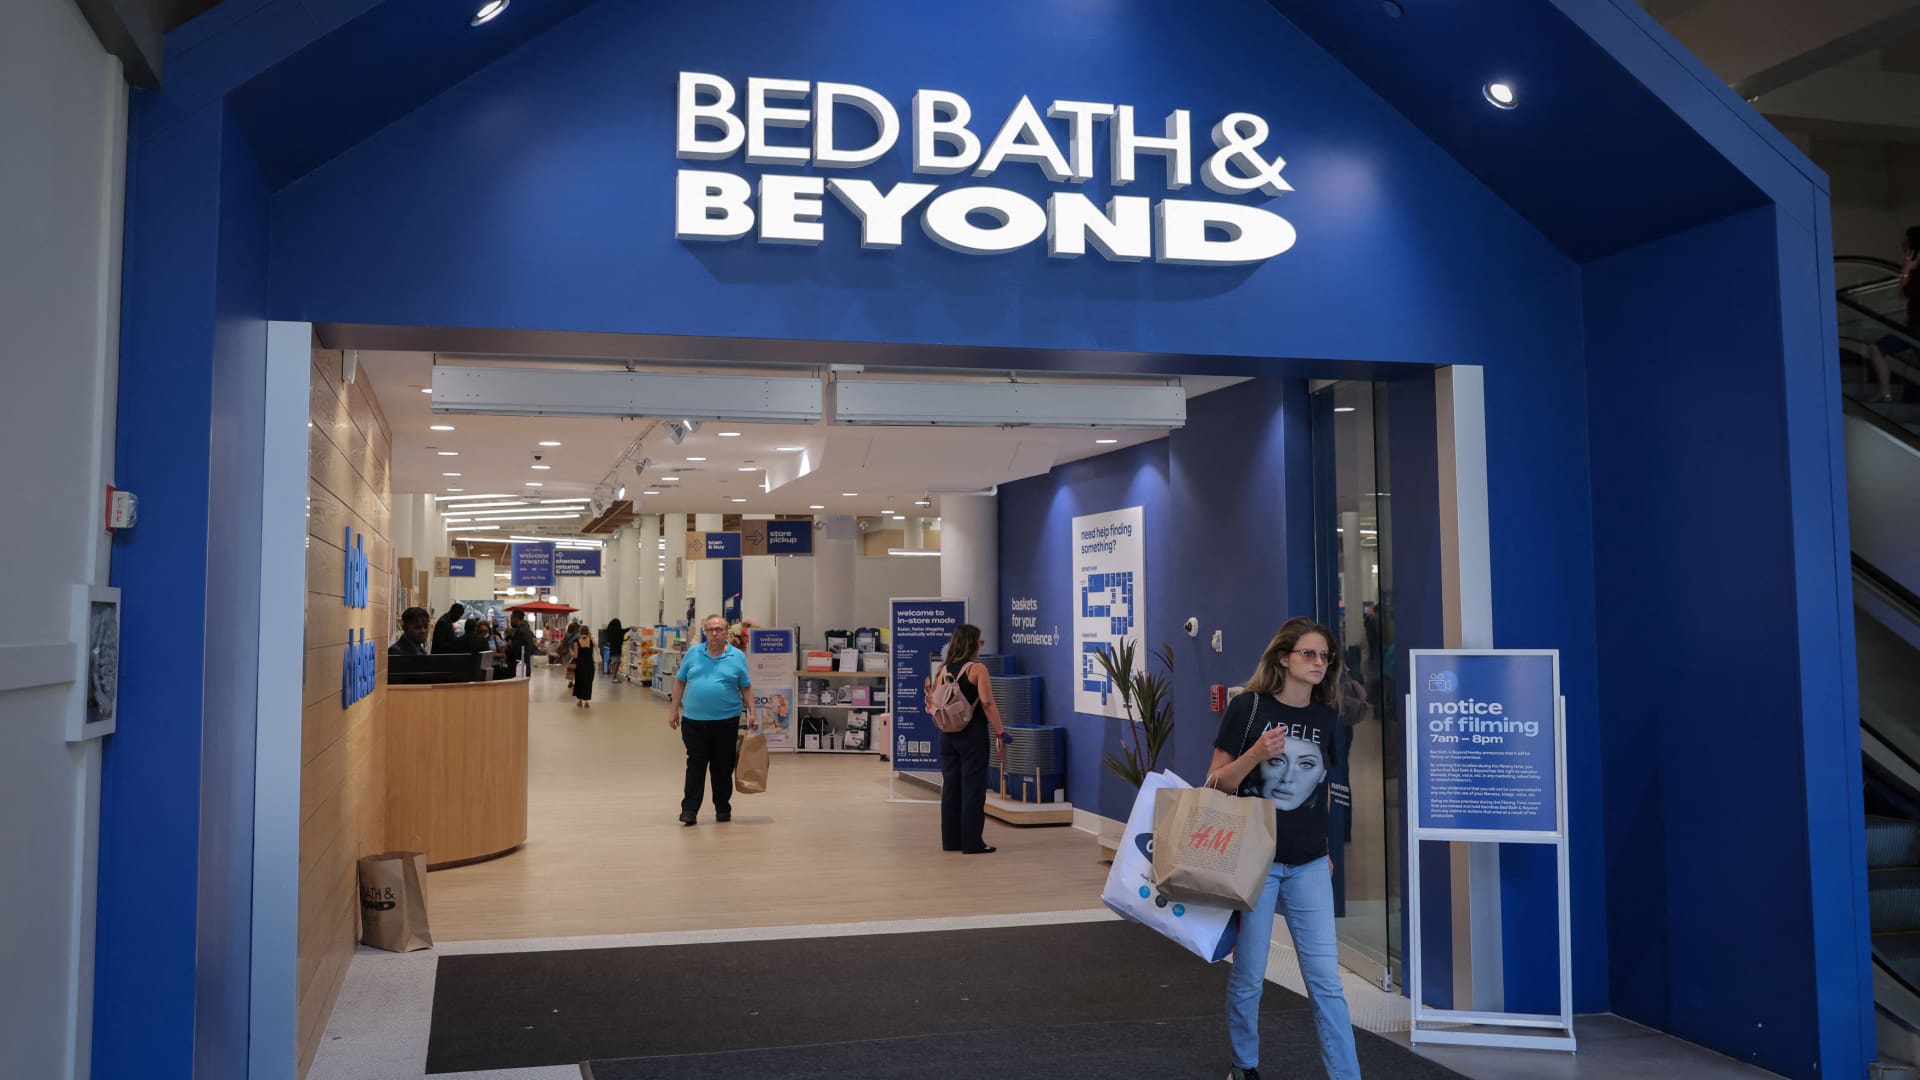 Bed Bath & Beyond appoints interim CEO Sue Gove to position permanently